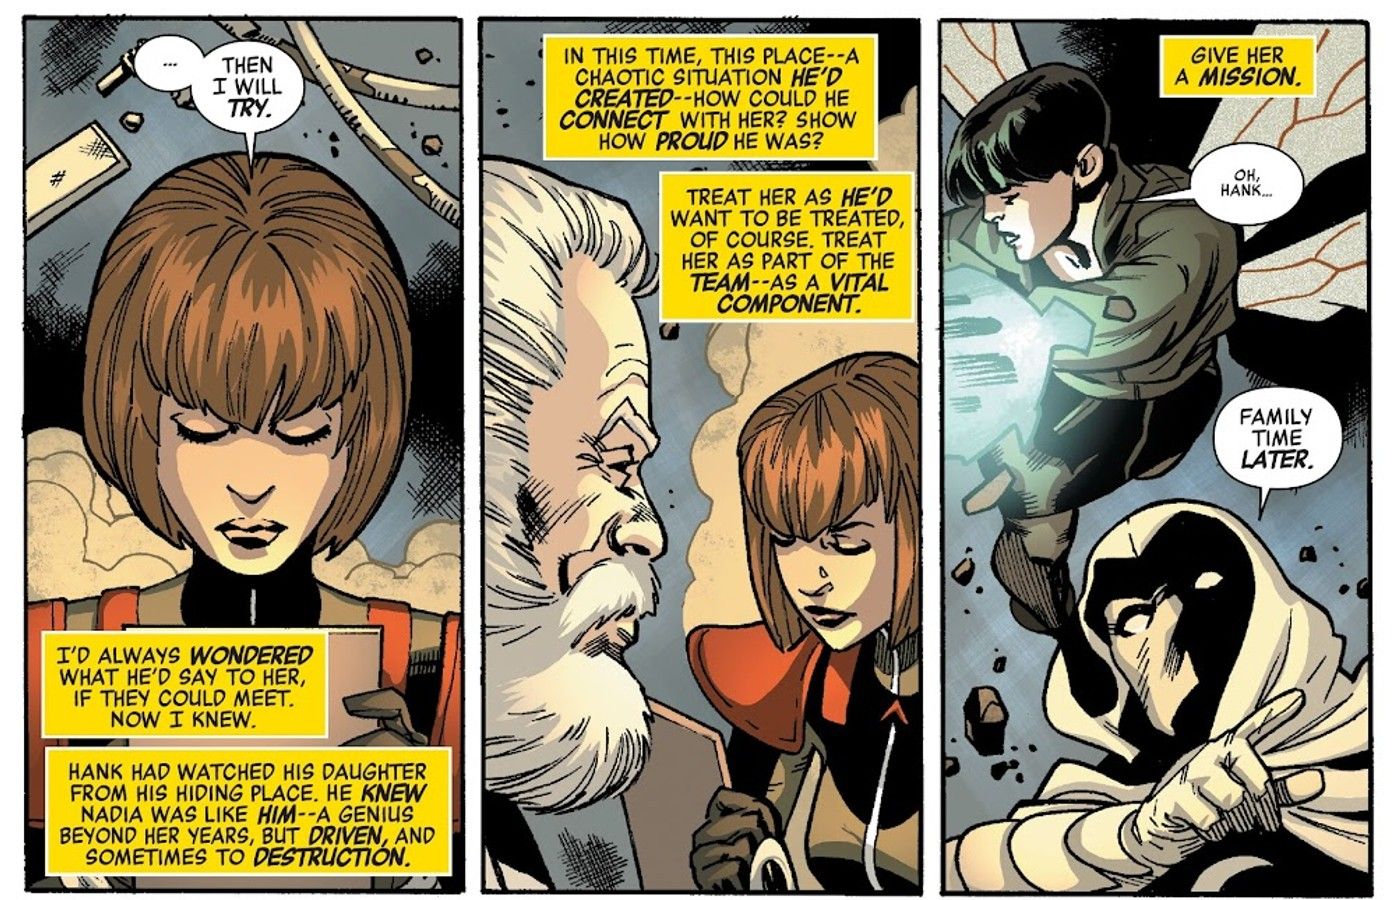 Hank Pym former Ant Man gives Wasp his daughter Nadia van Dyne a mission as Moon Knight and Janet van Dyne watch